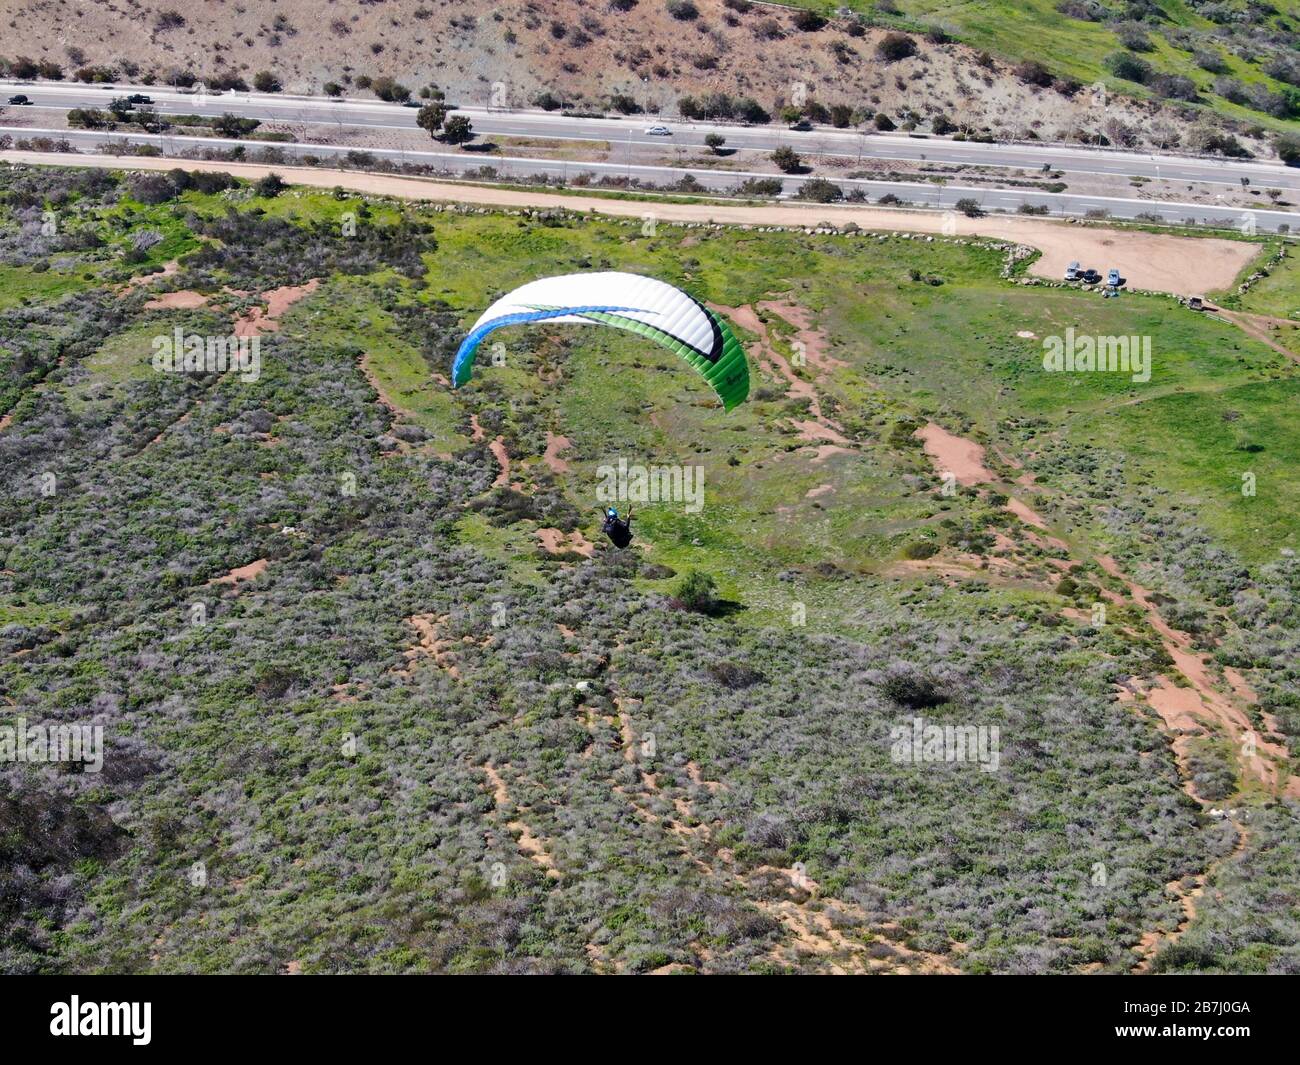 Para-glider over the top of the mountain during summer sunny day. Para-glider on the para-plane, strops -soaring flight moment flying over Black Mountain in San Diego, California. USA. February 22nd, 2020 Stock Photo